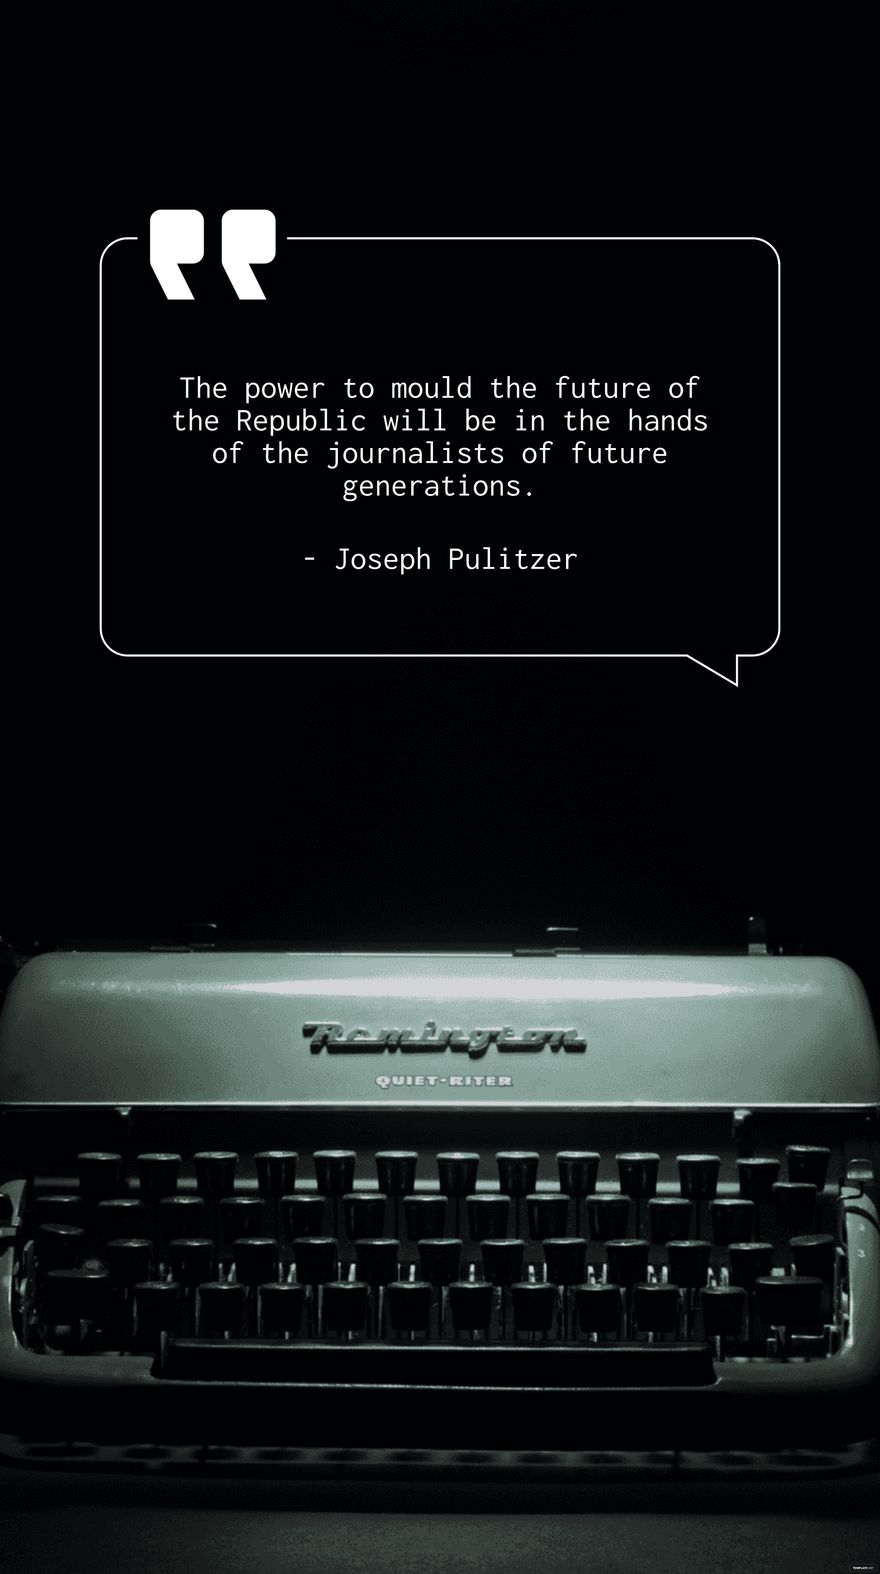 Free The power to mould the future of the Republic will be in the hands of the journalists of future generations. - Joseph Pulitzer